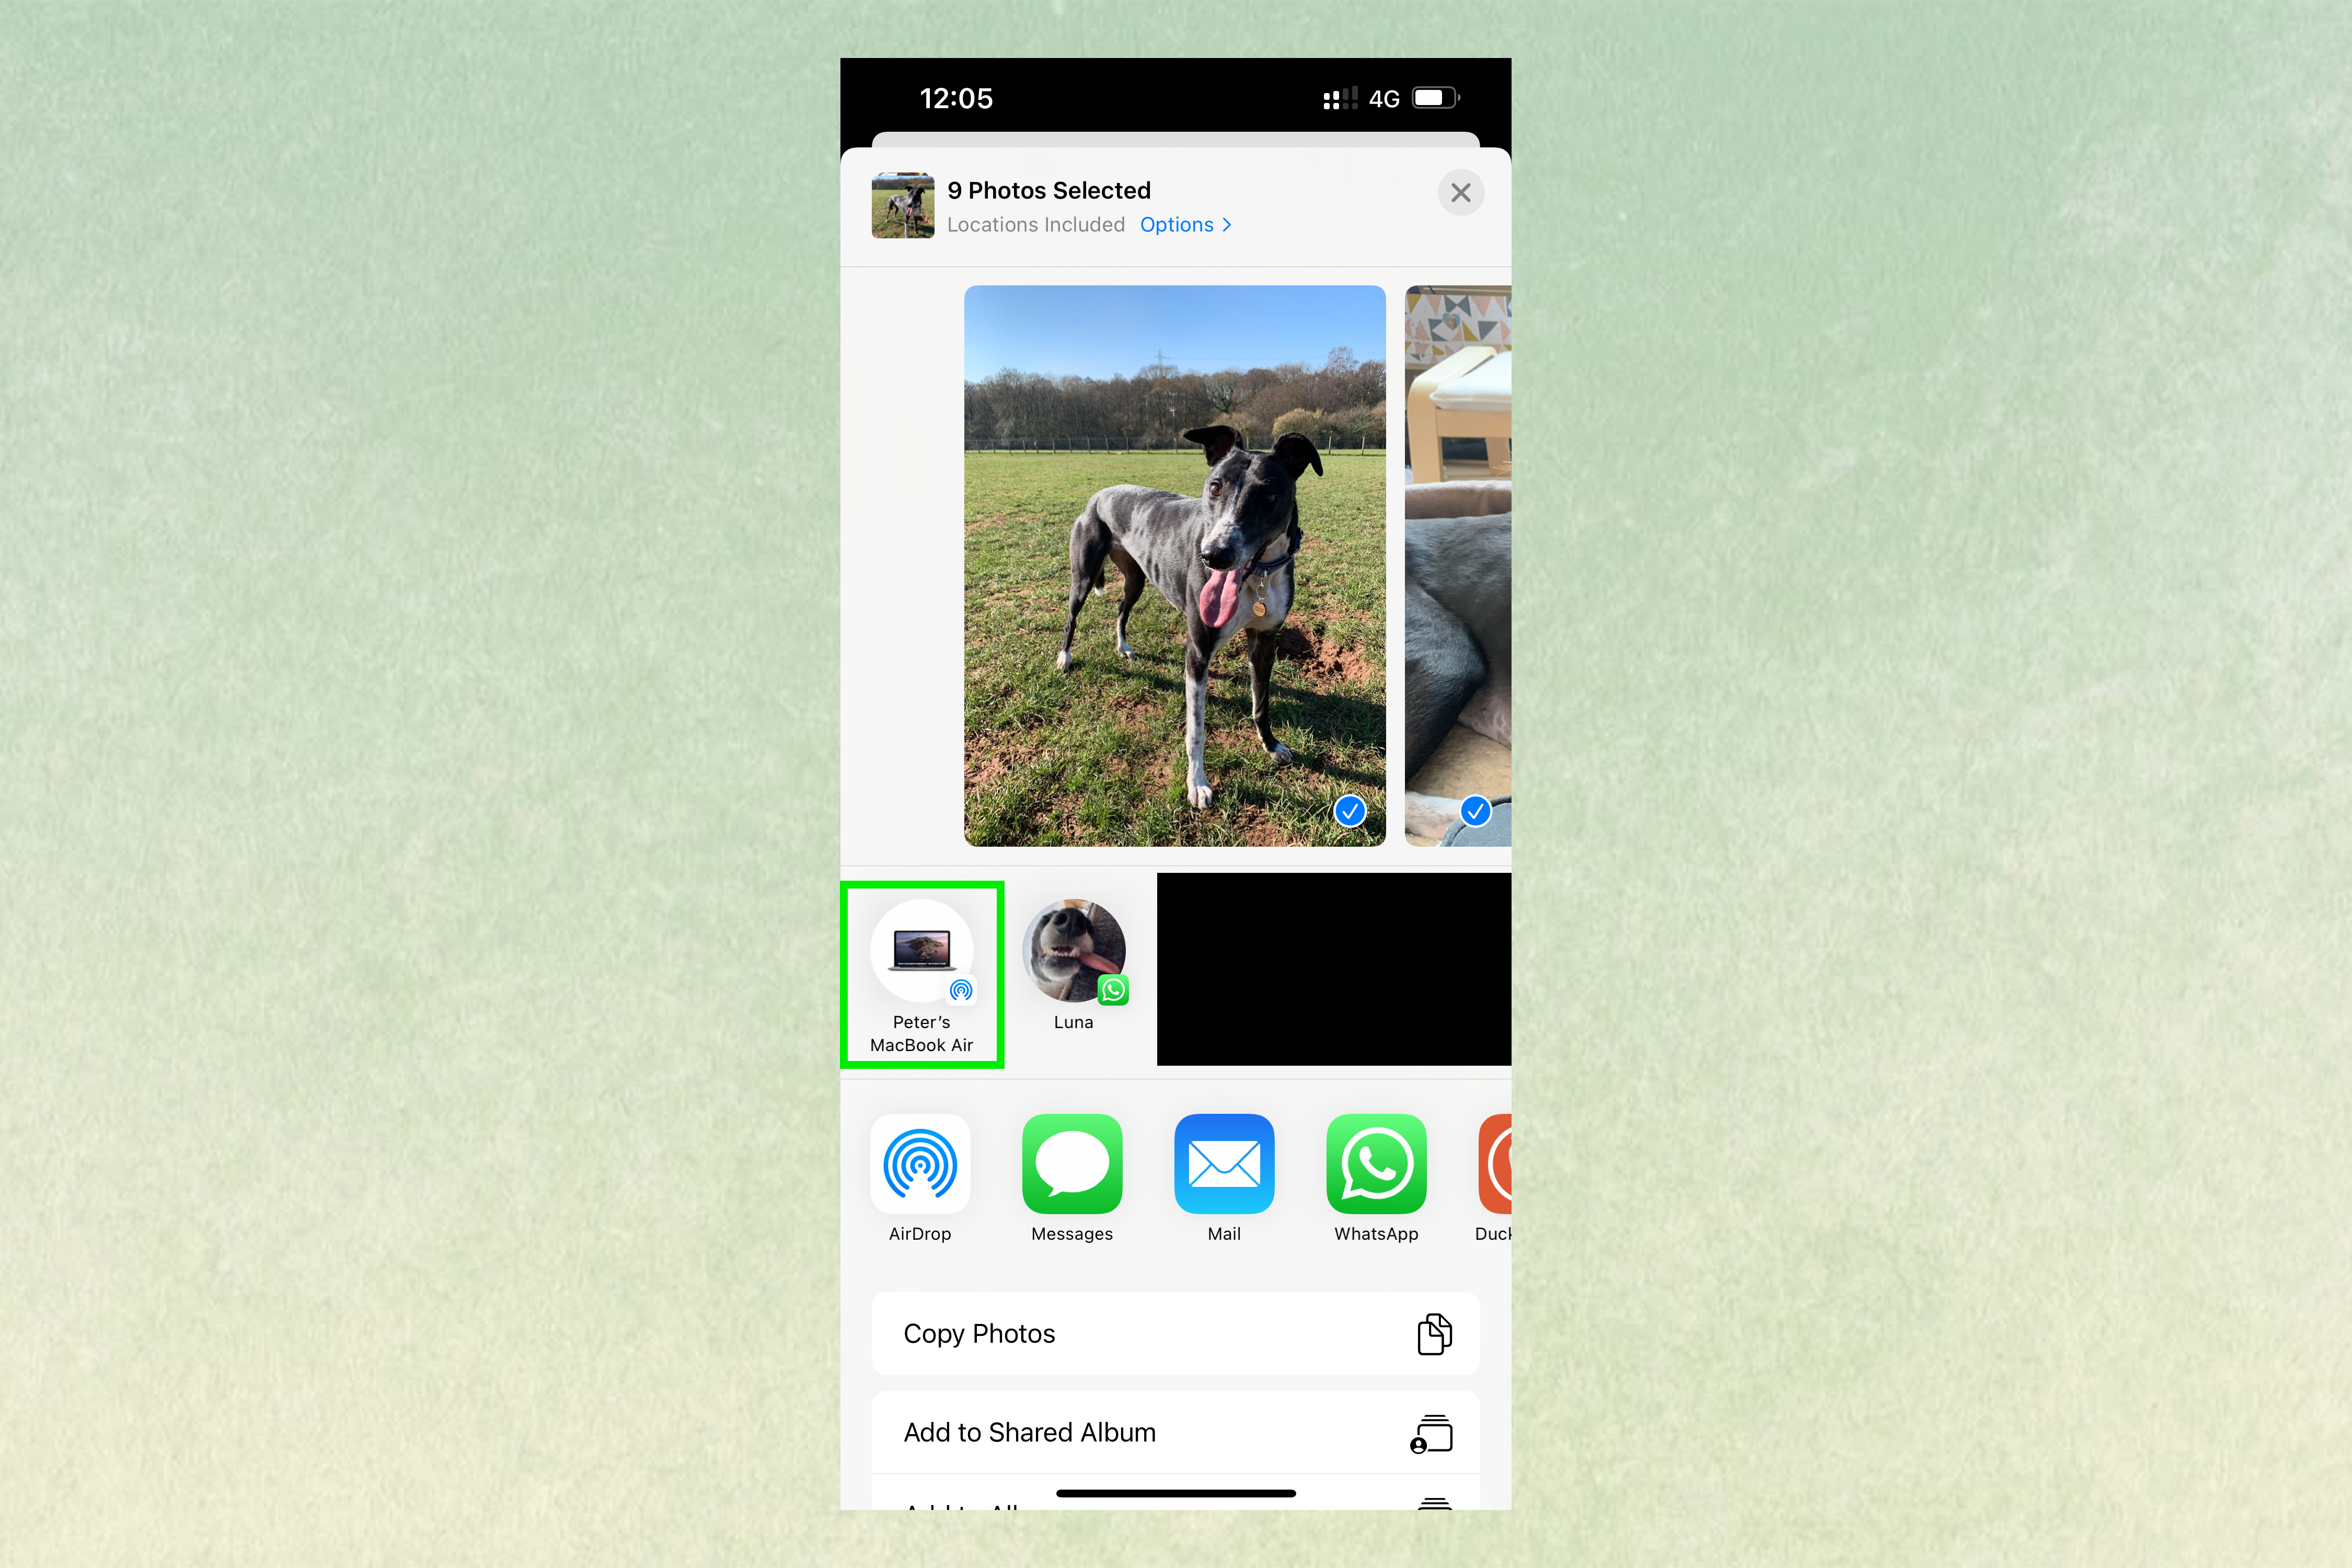 Screenshots of how to transfer photos from iPhone to Mac using AirDrop